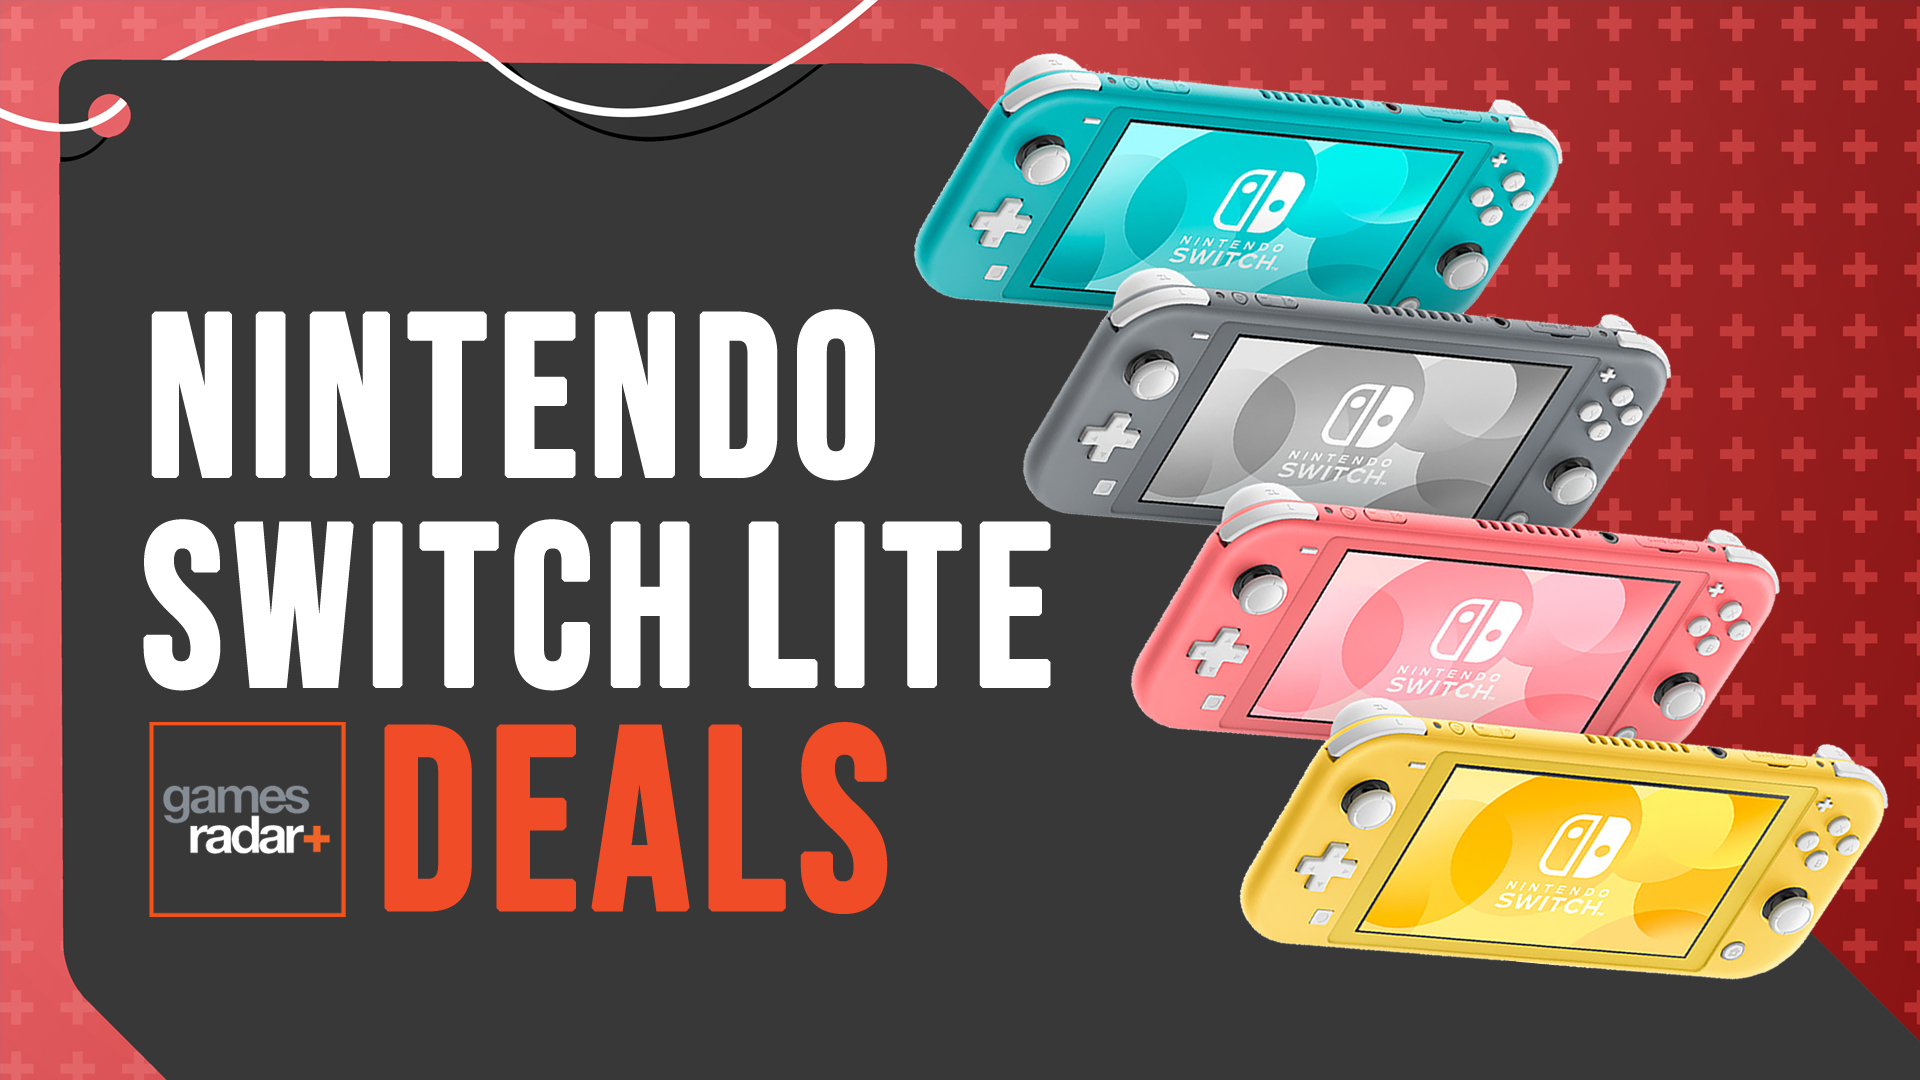 The cheapest Nintendo Switch Lite bundles, prices, and deals in